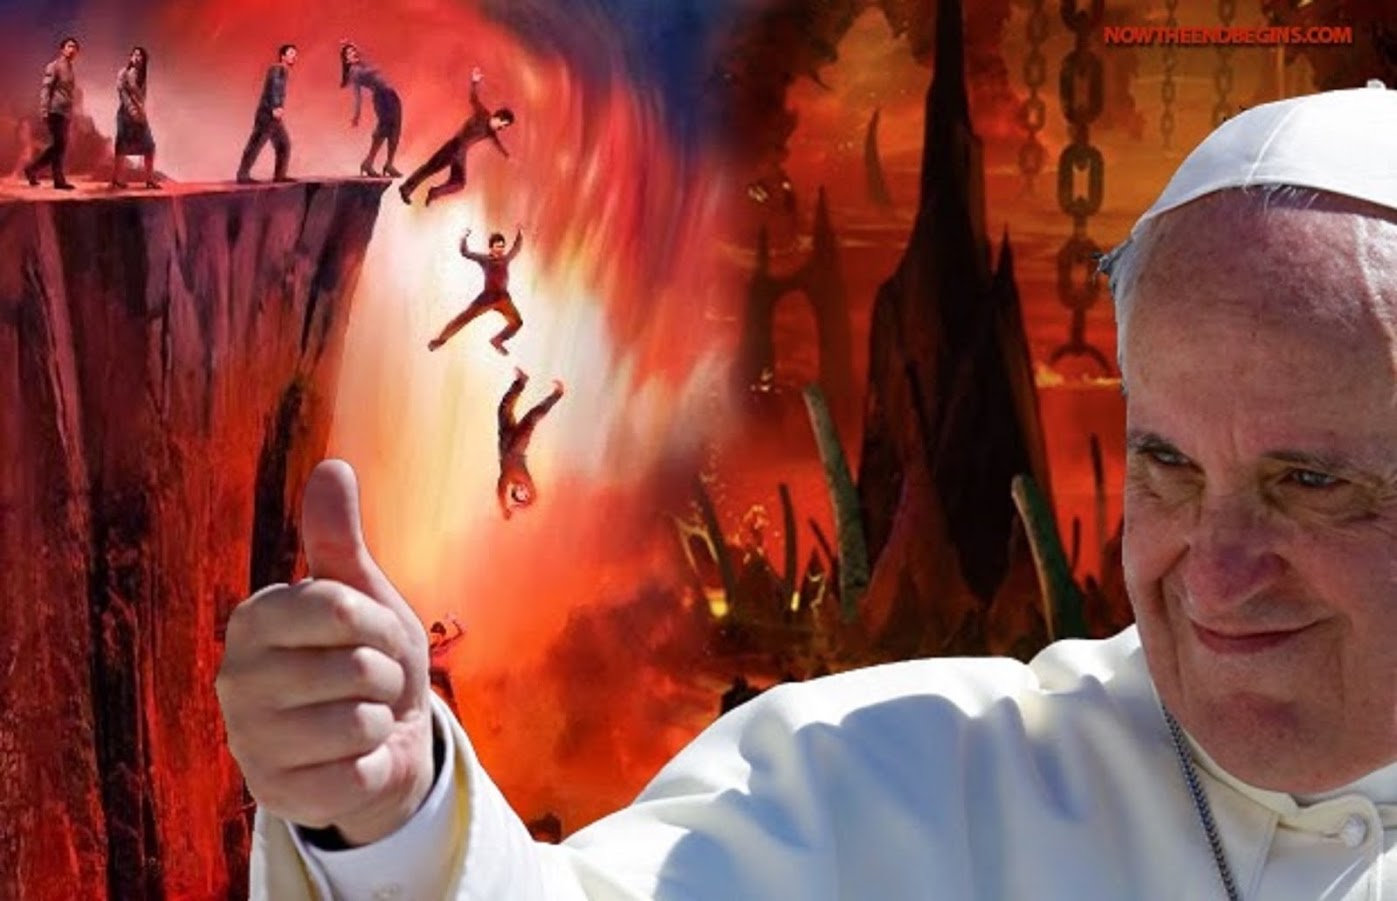 POPE FRANCIS - THE FALSE PROPHET WANTS TO LEAD PEOPLE TO HELL